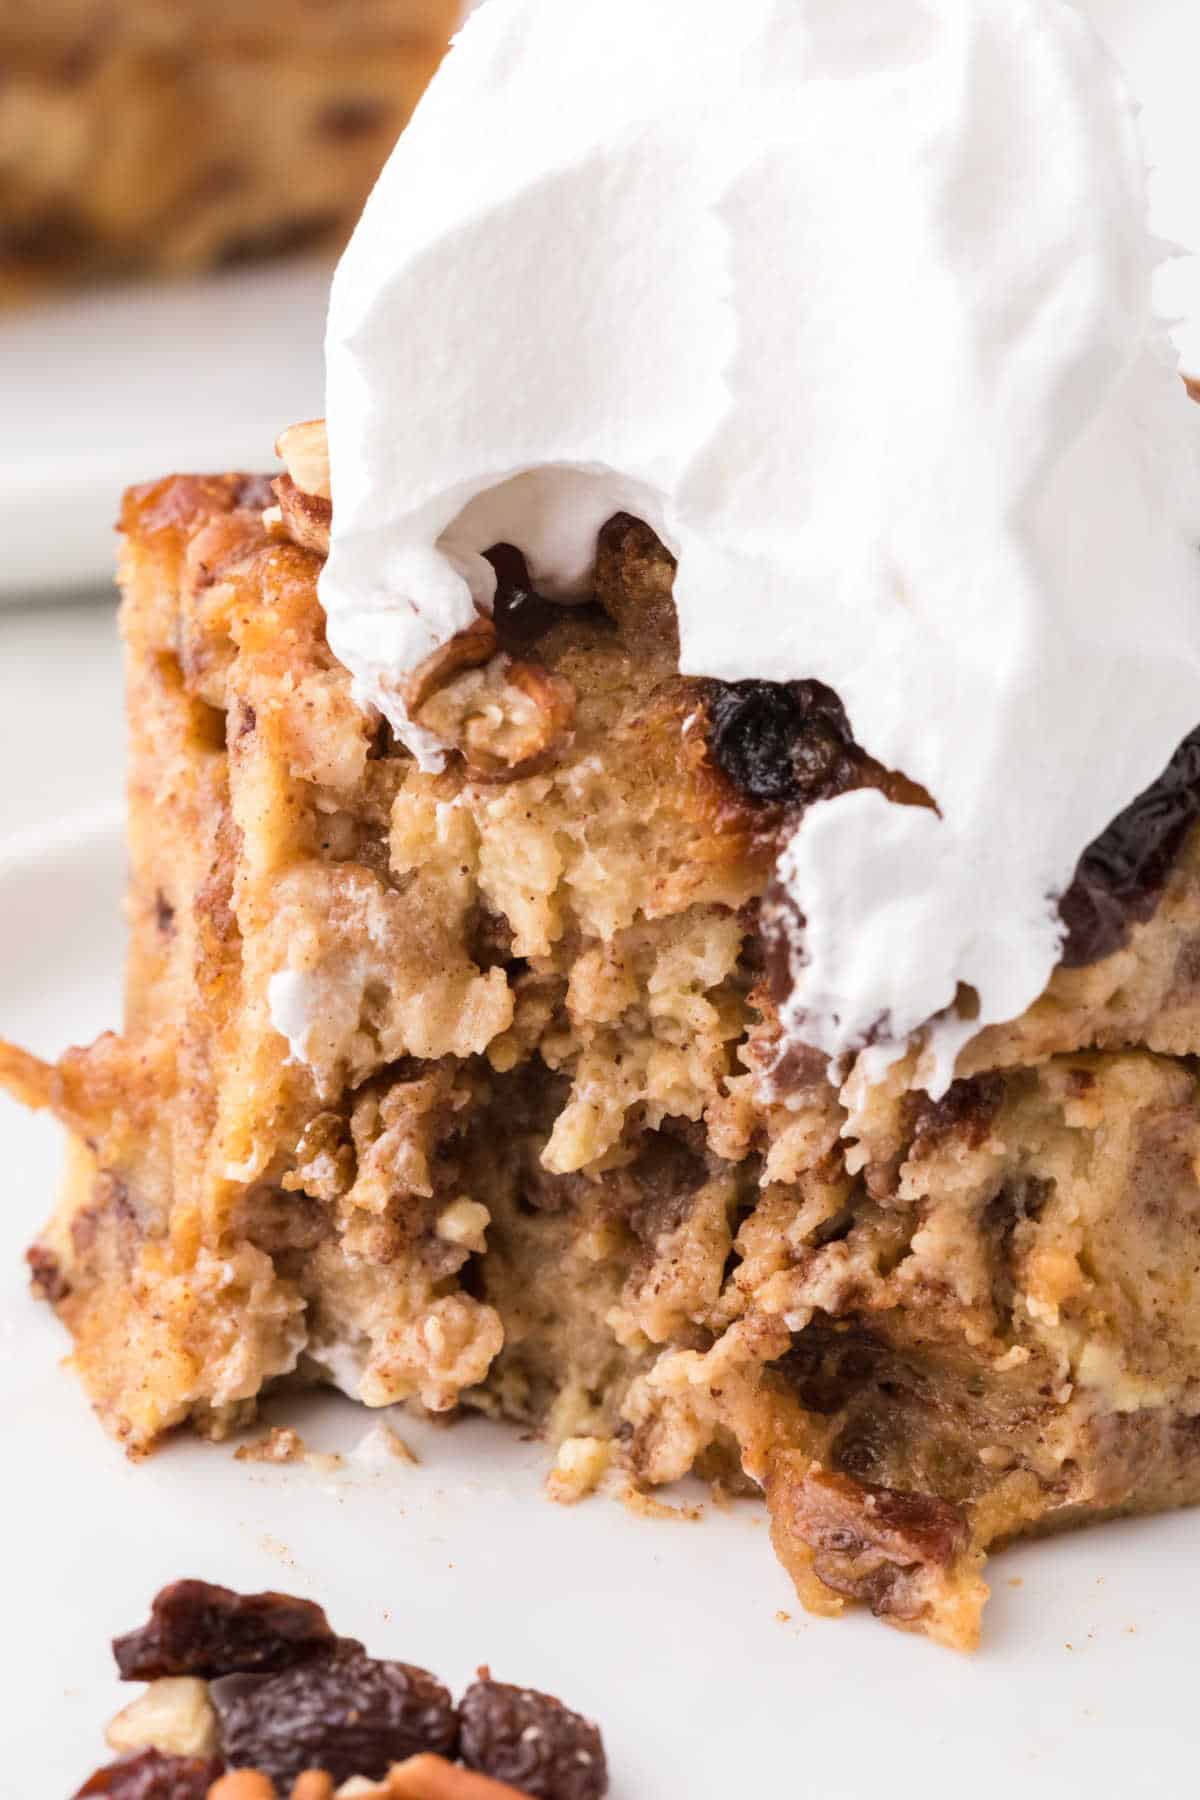 A cinnamon raisin bread pudding slice with whipped cream on a plate.